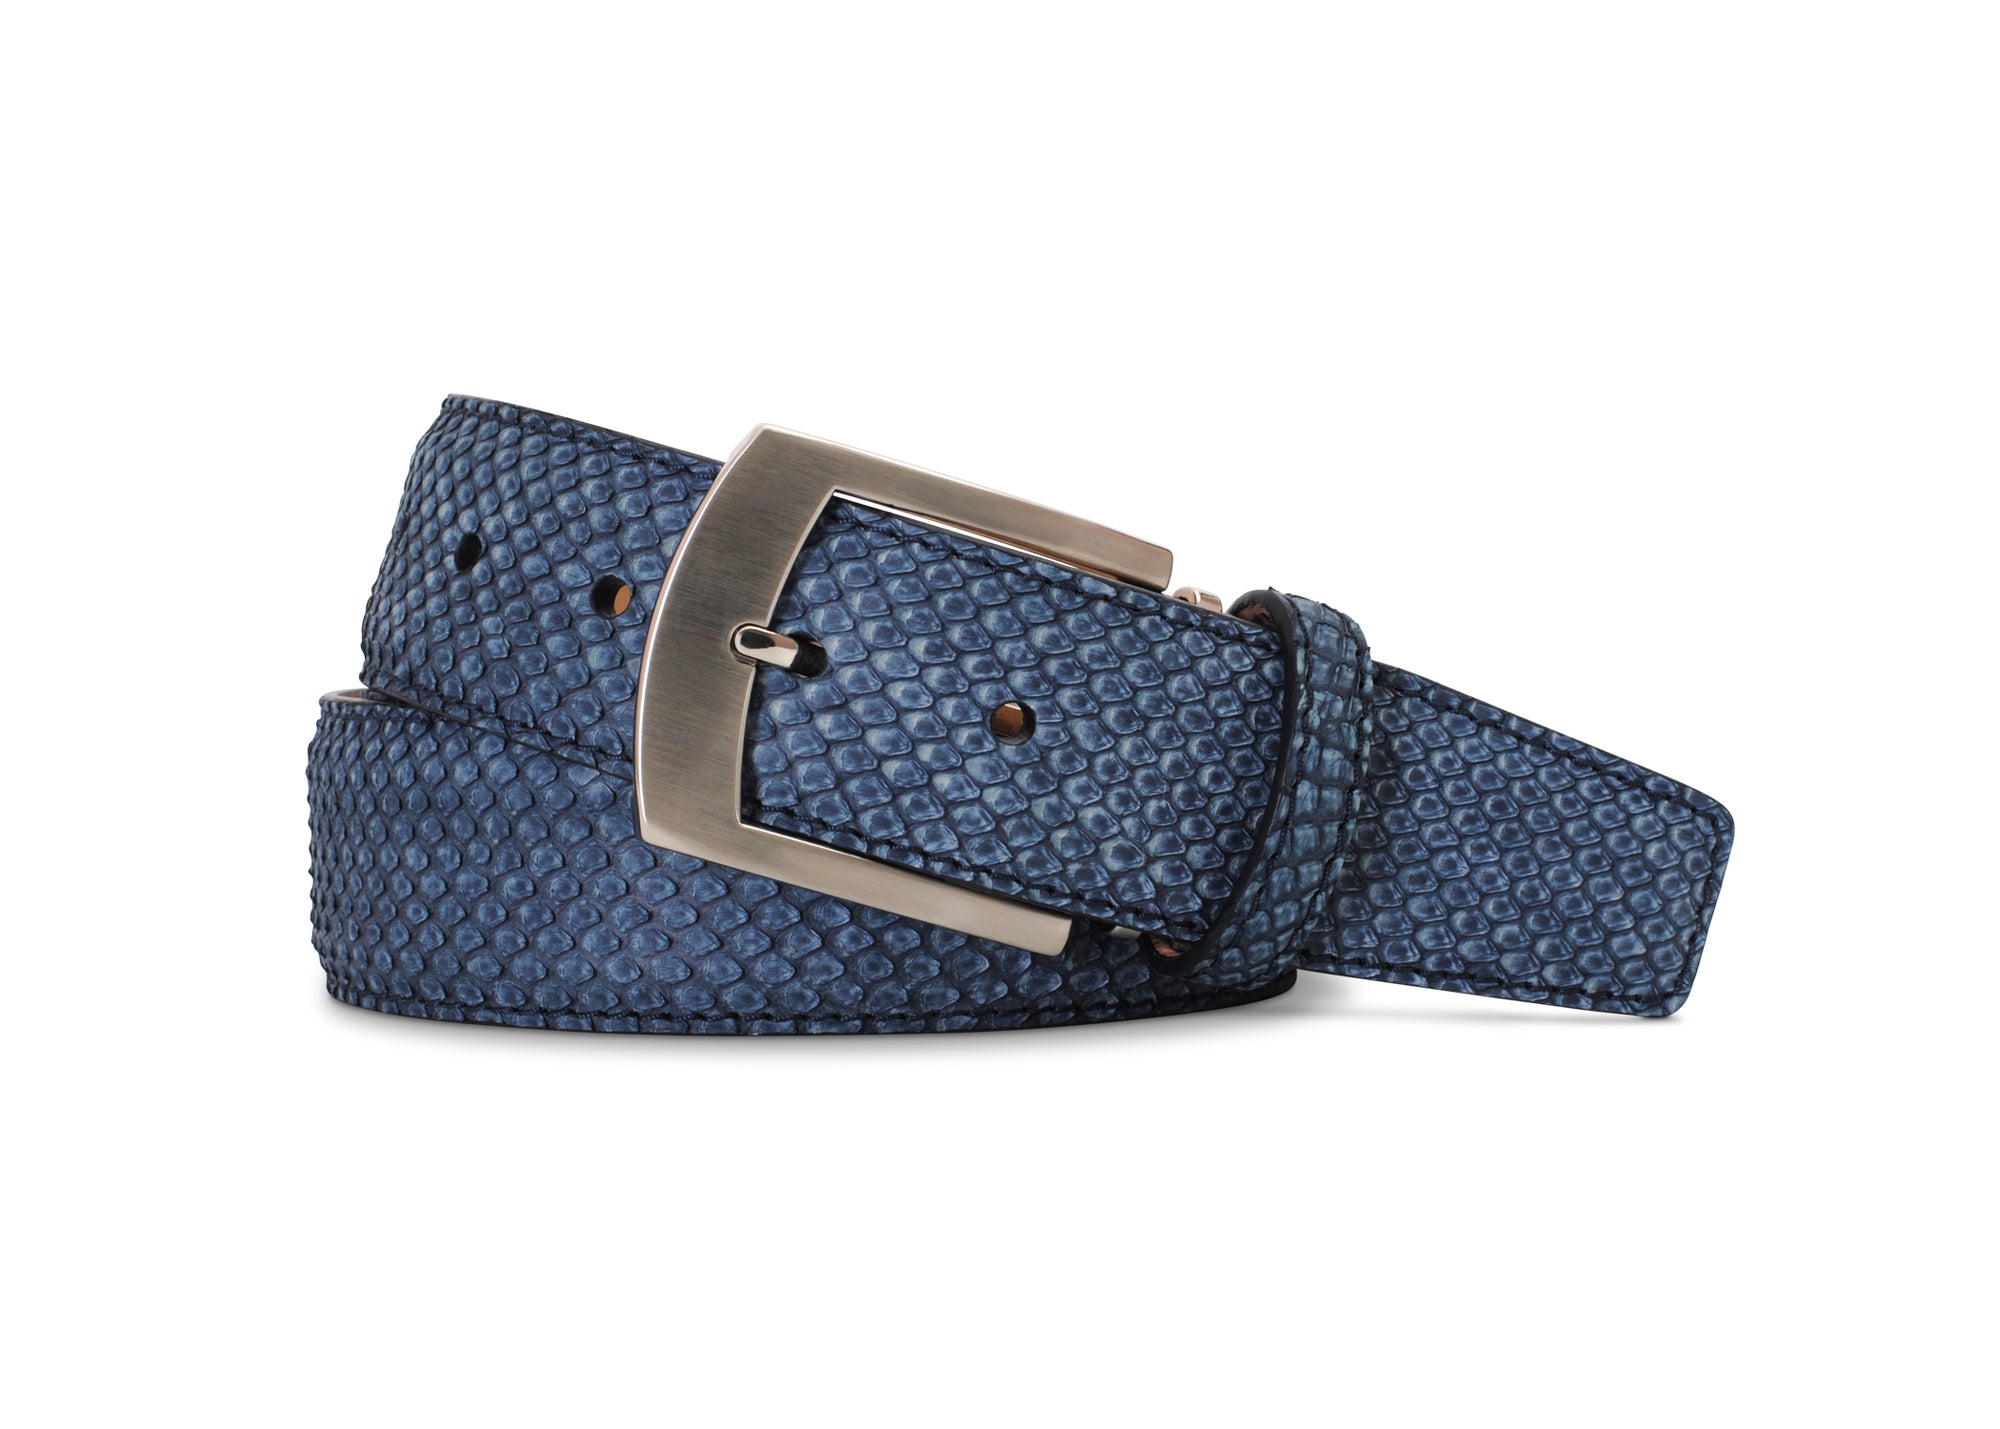 Sueded Belly-Cut Python Belt in Navy by Brookes & Hyde